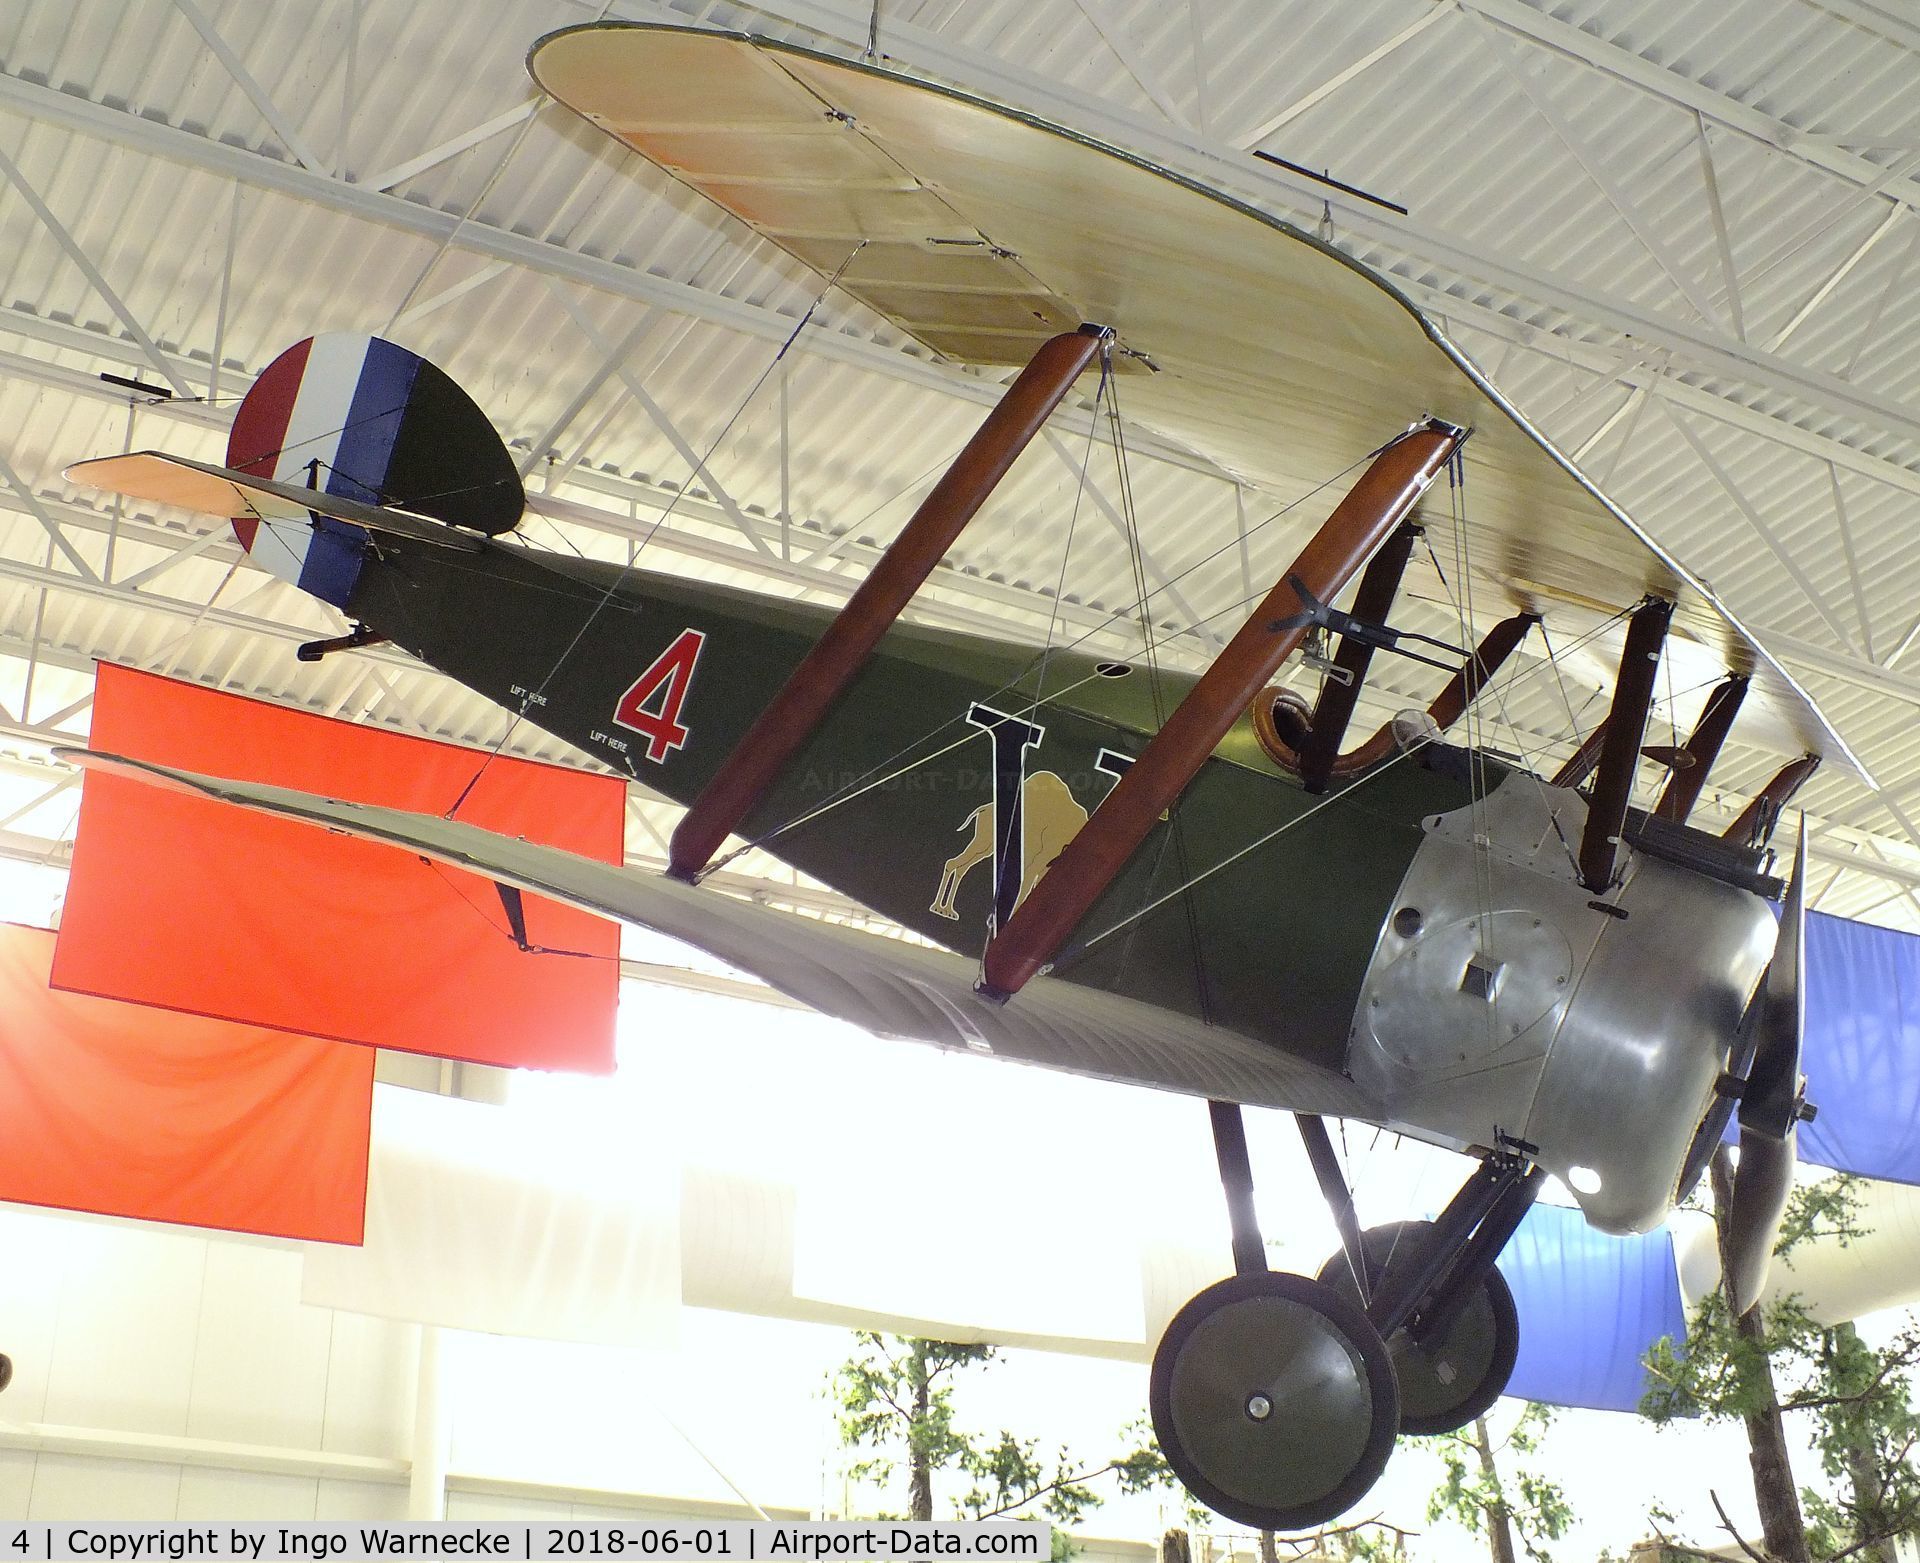 4, Sopwith F.1 Camel replica C/N unknown_4, Sopwith F.1 Camel replica at the US Army Aviation Museum, Ft. Rucker